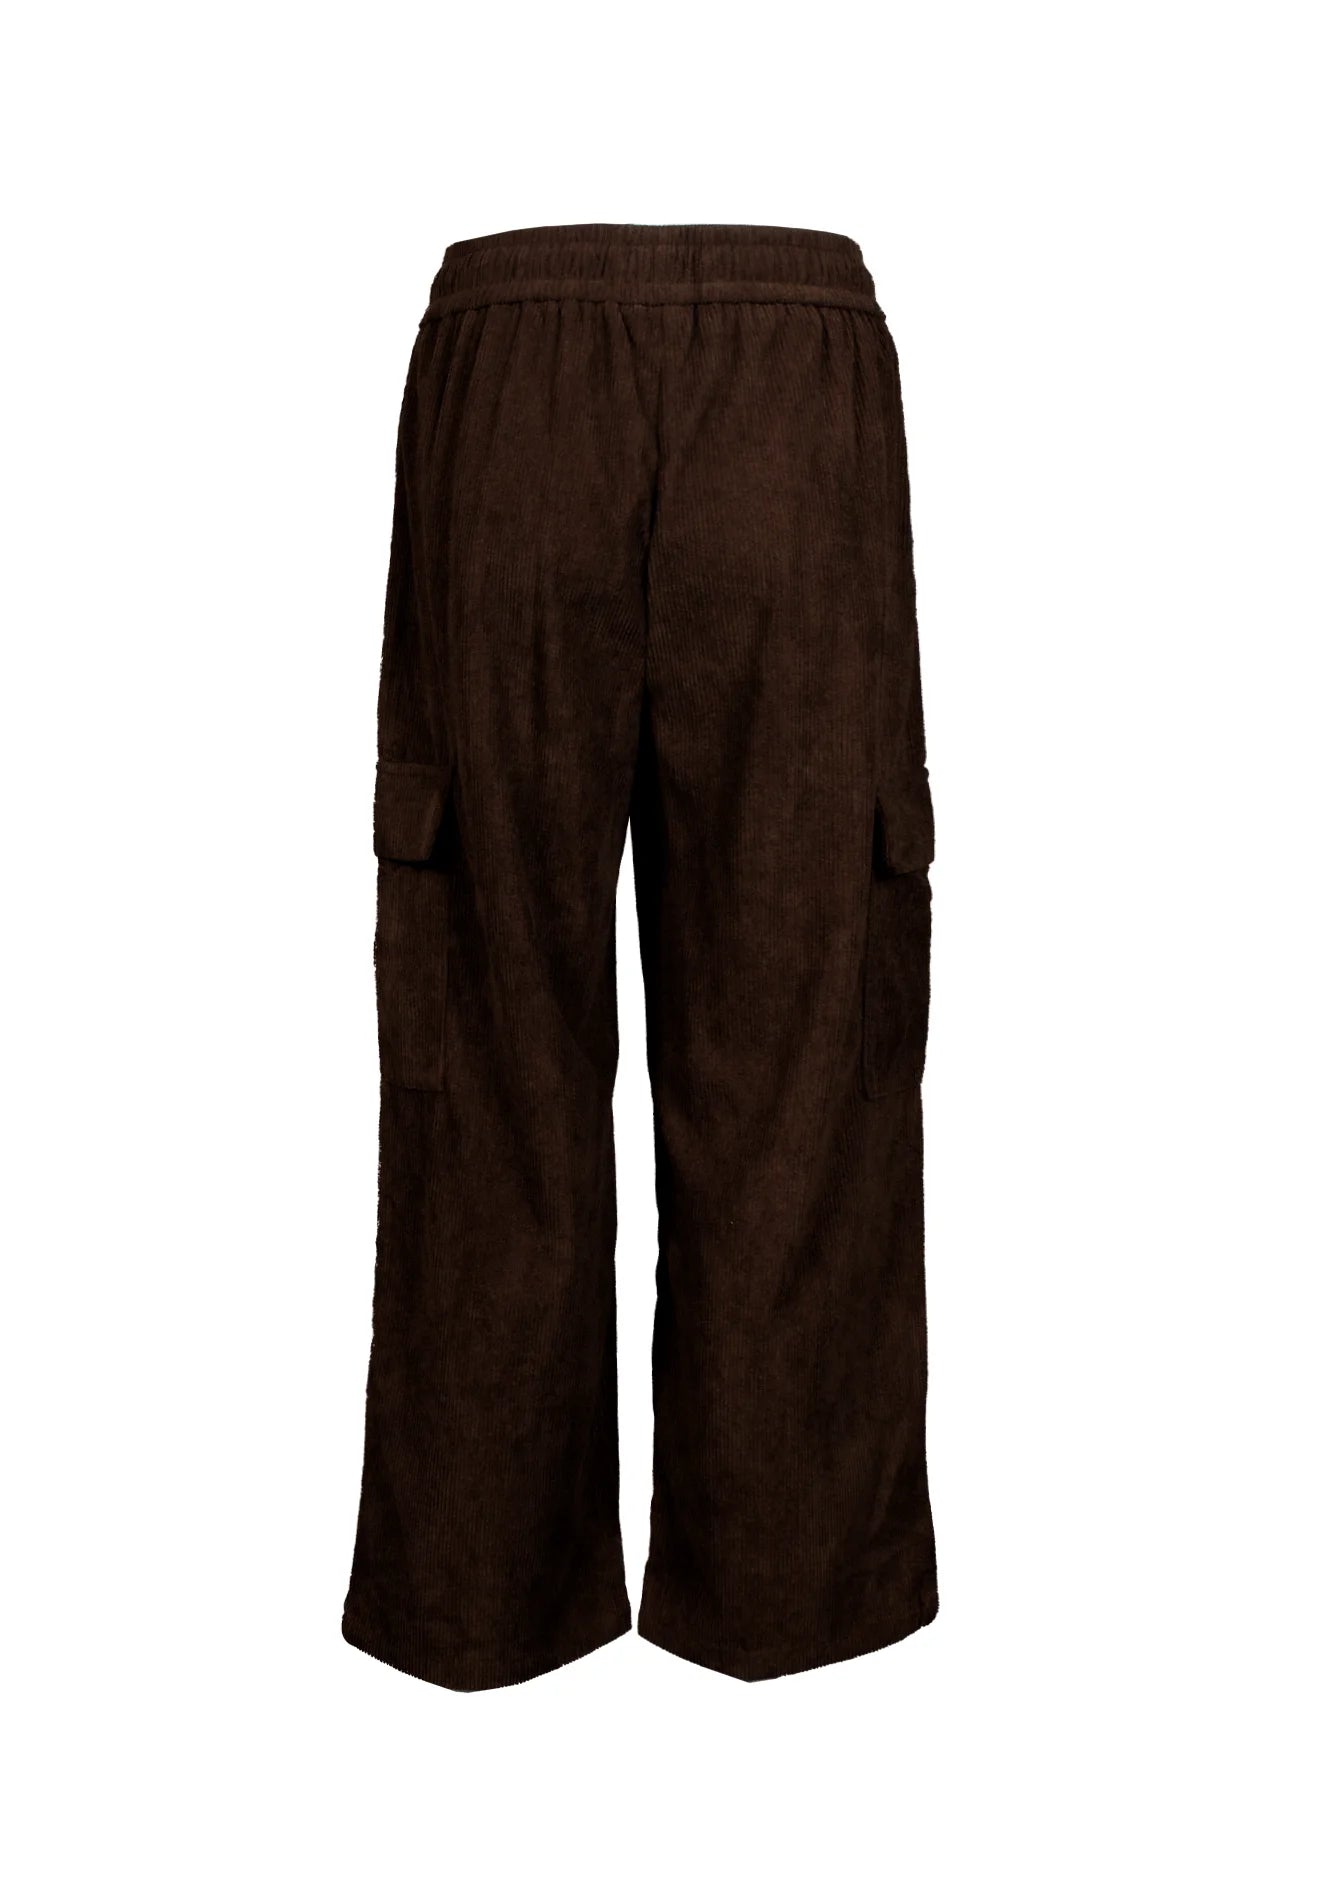 DAISY by VOIR Mid-Rise Relaxed-Fit Corduroy Cargo Jogger Pants